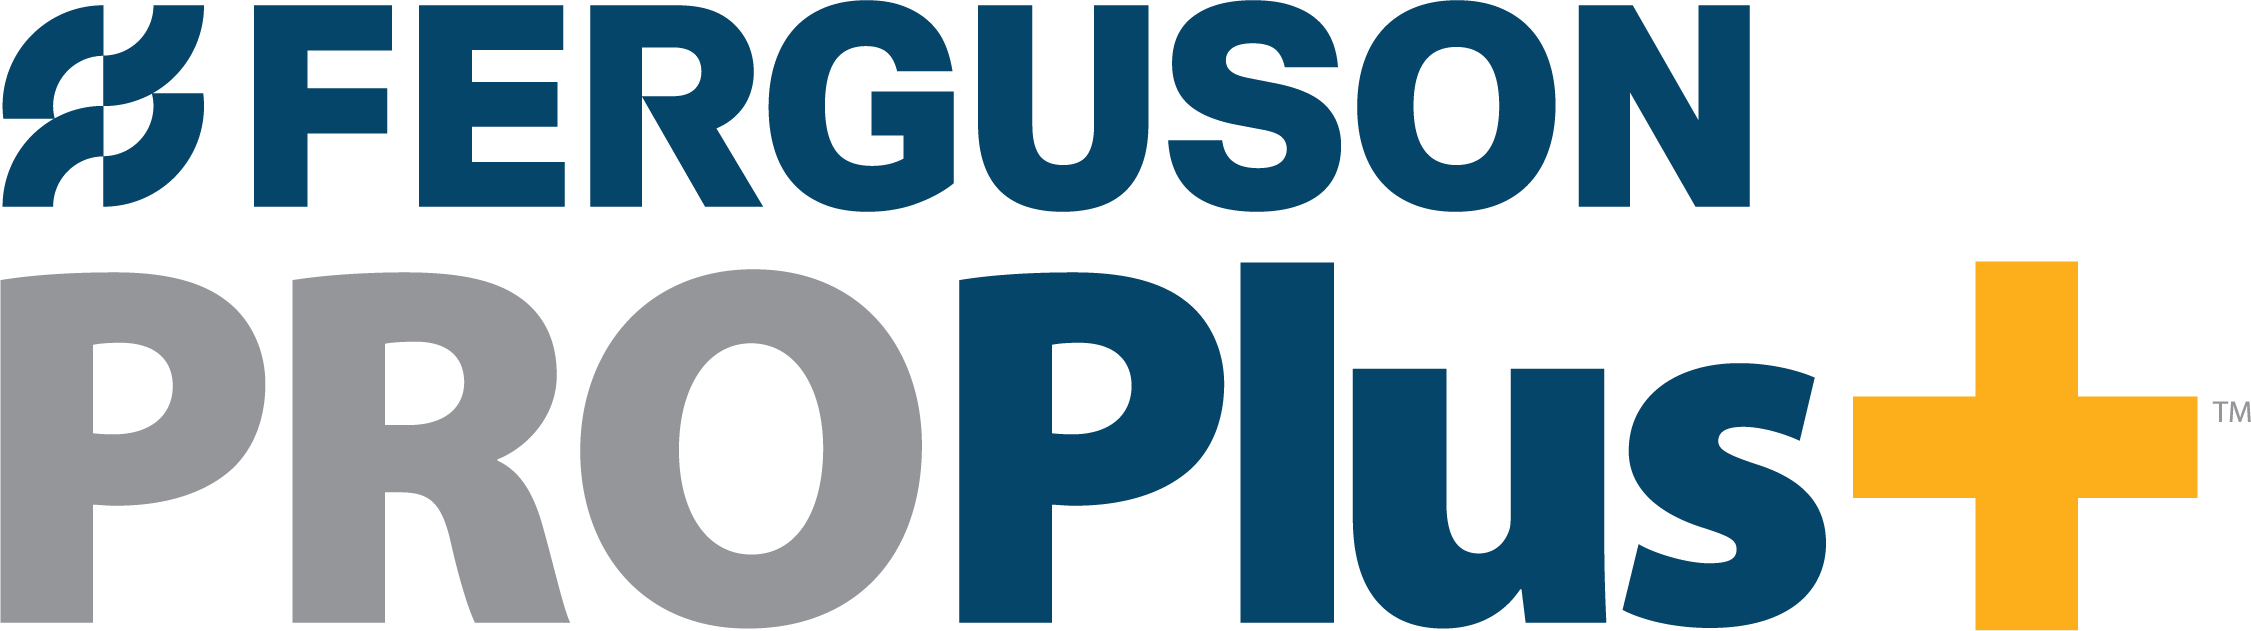 The Ferguson logo and name written in blue over the words PRO Plus in gray and blue, and a dark yellow plus sign to the right.